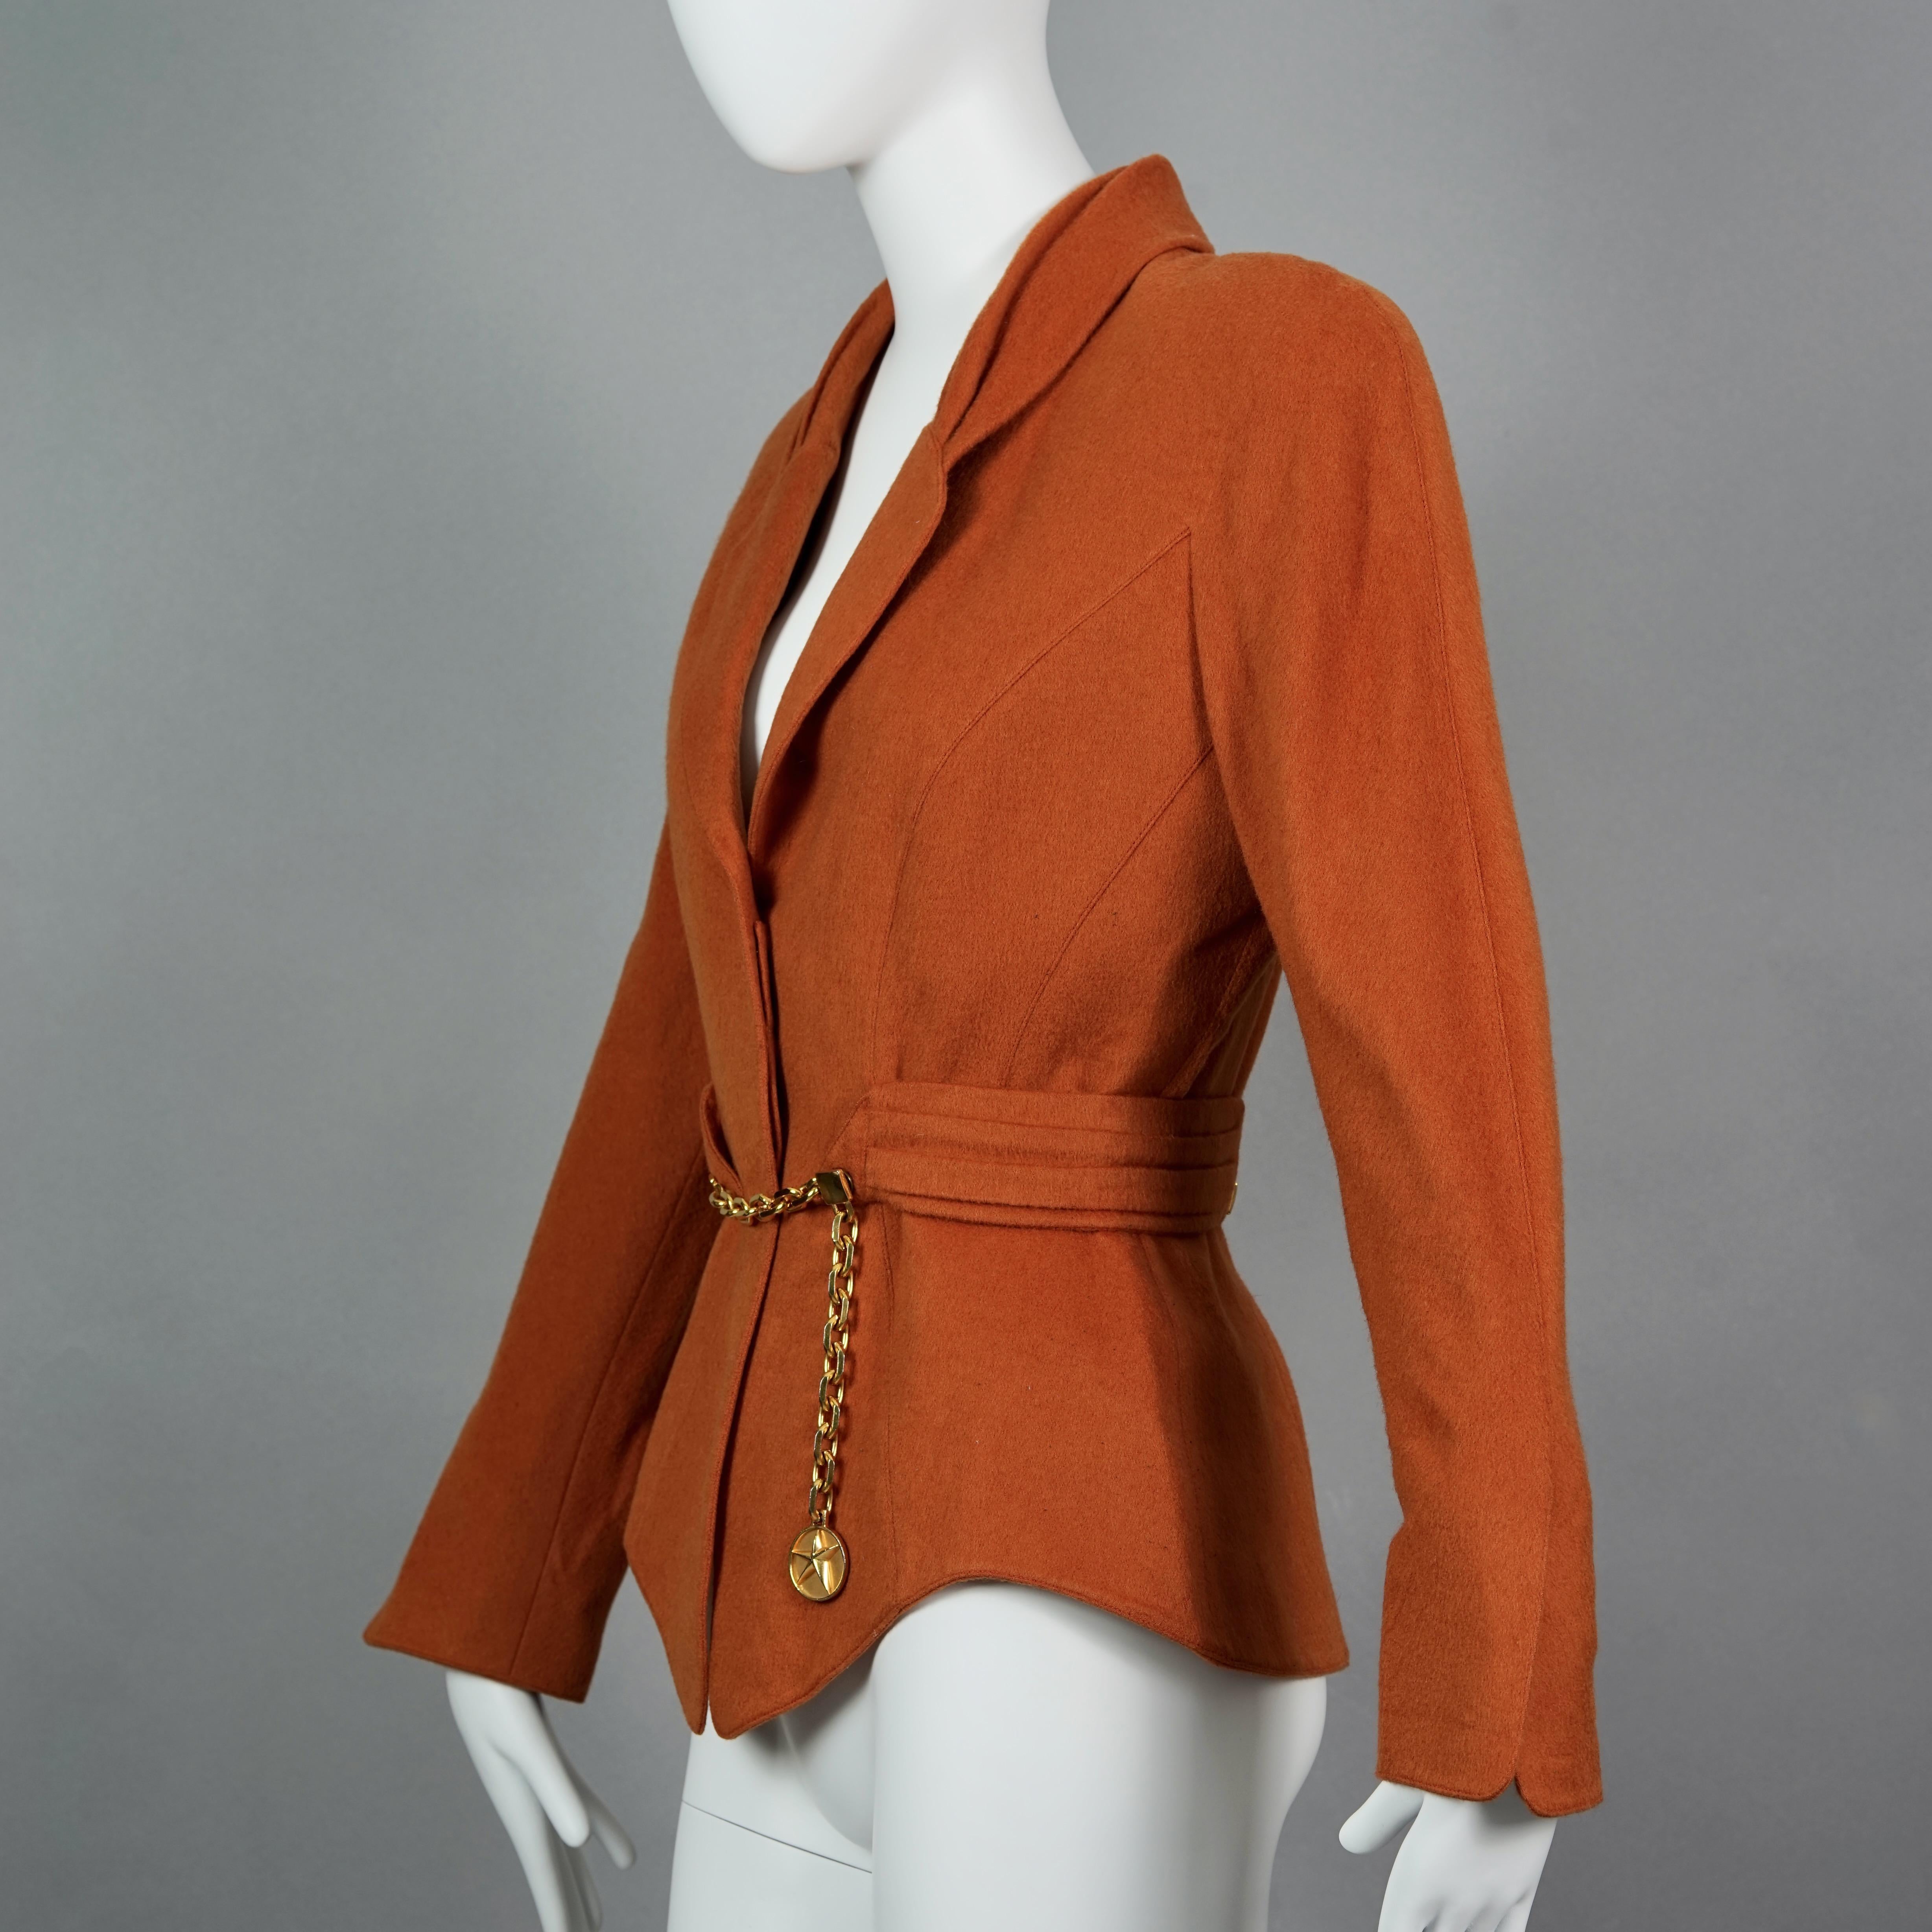 Vintage THIERRY MUGLER Structured Belted Chain Burnt Orange Wool Jacket

Measurements taken laid flat, please double bust, waist and hips :
Shoulders: 17.32 inches (44 cm)
Sleeves: 22.83 inches (58 cm)
Bust: 19.29 inches (49 cm)
Waist: 13.77 inches